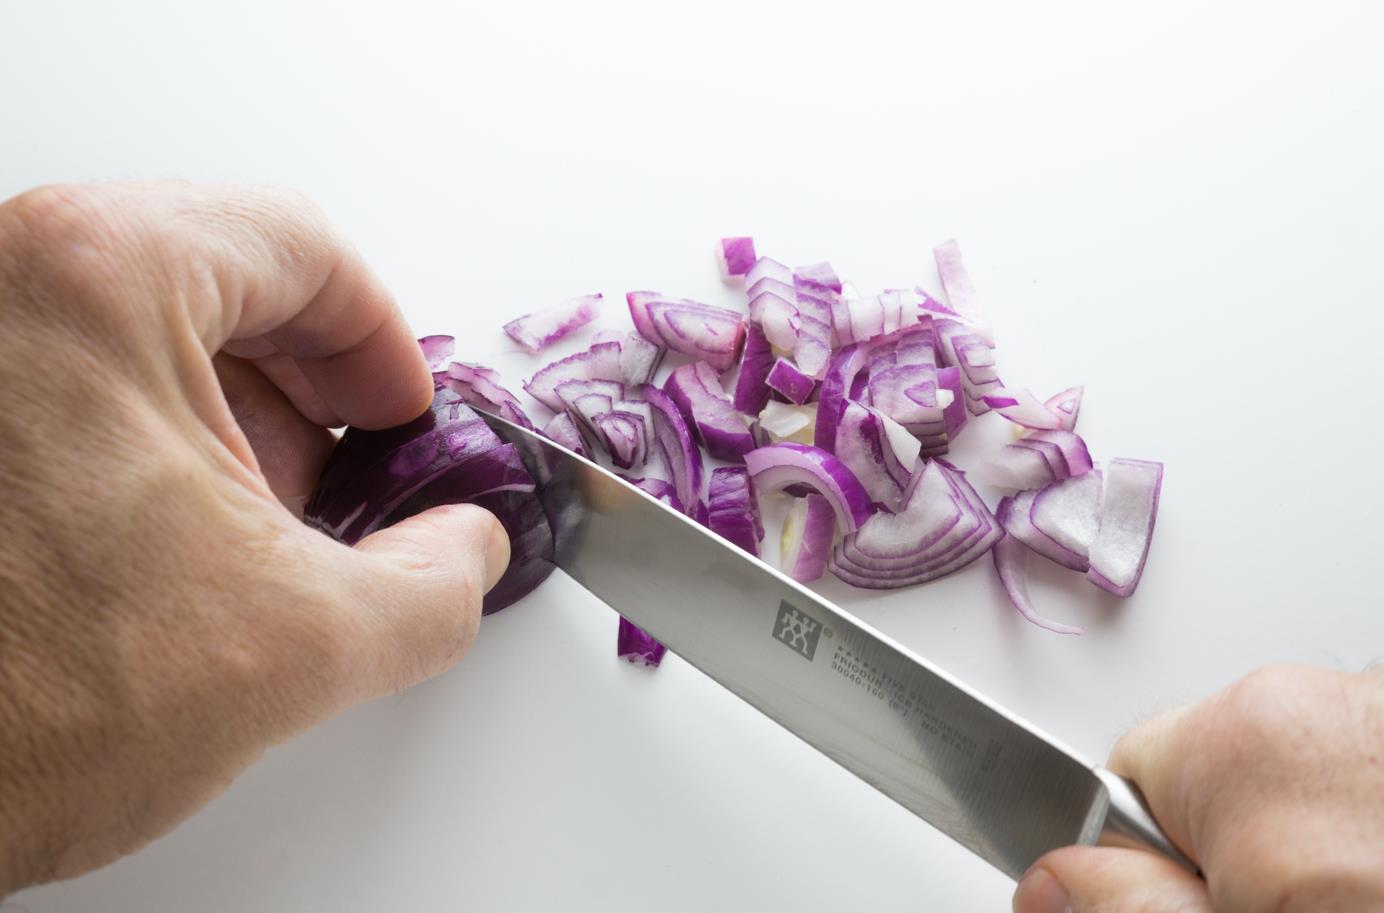 How to Test Knife Sharpness: 8 Proven Methods